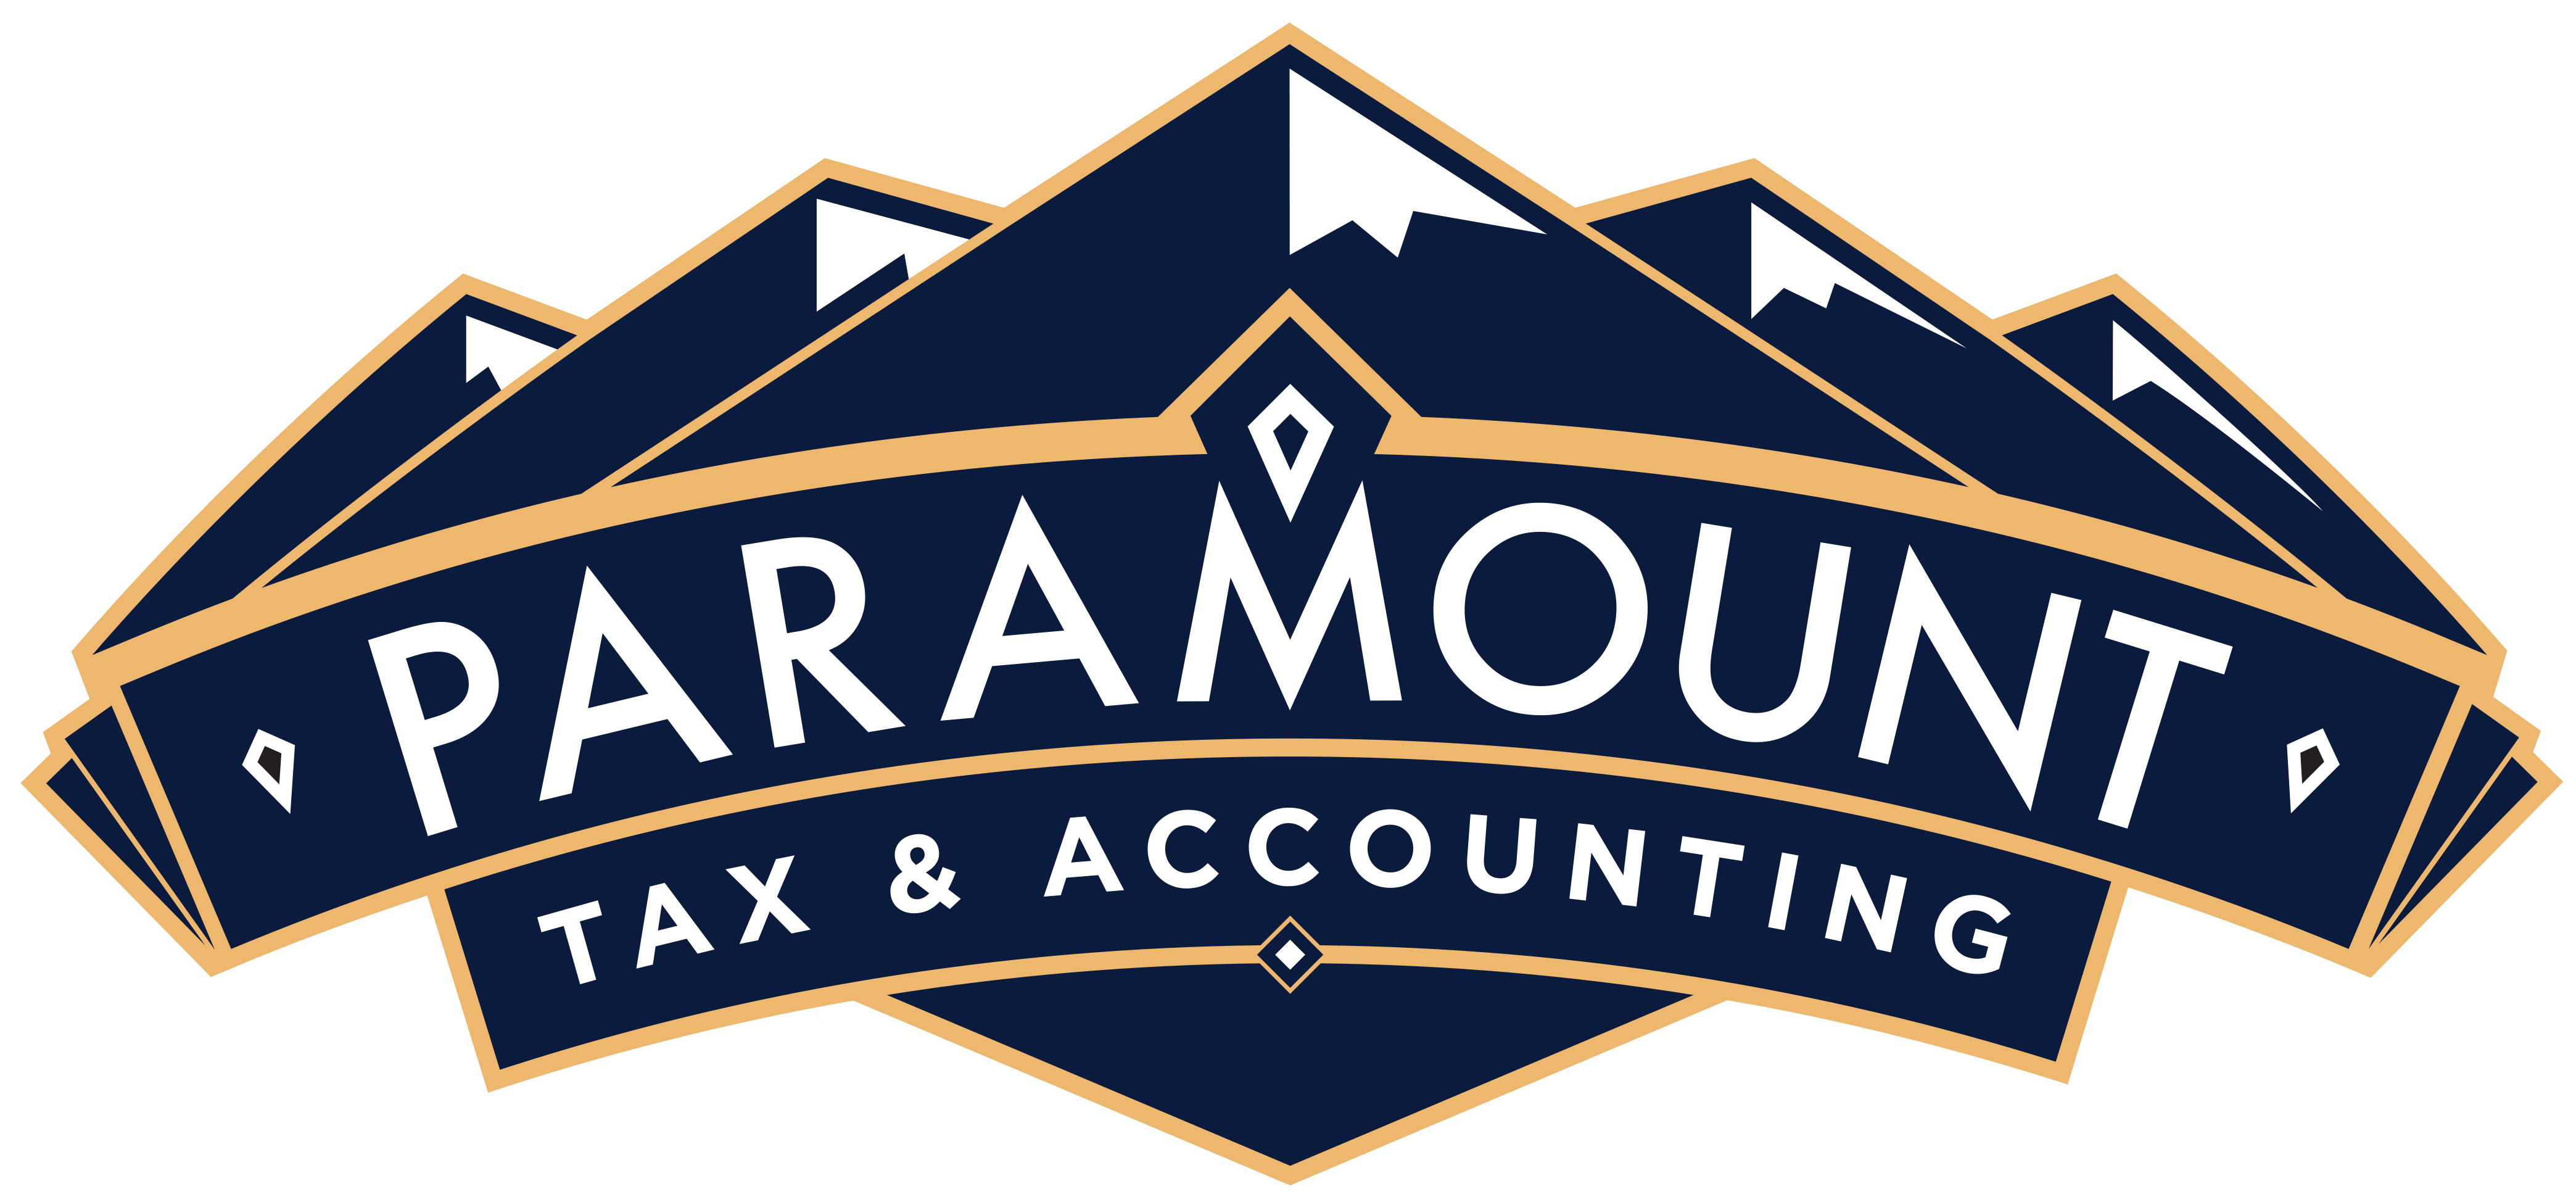 Review Paramount Tax & Accounting - Cottonwood Heights